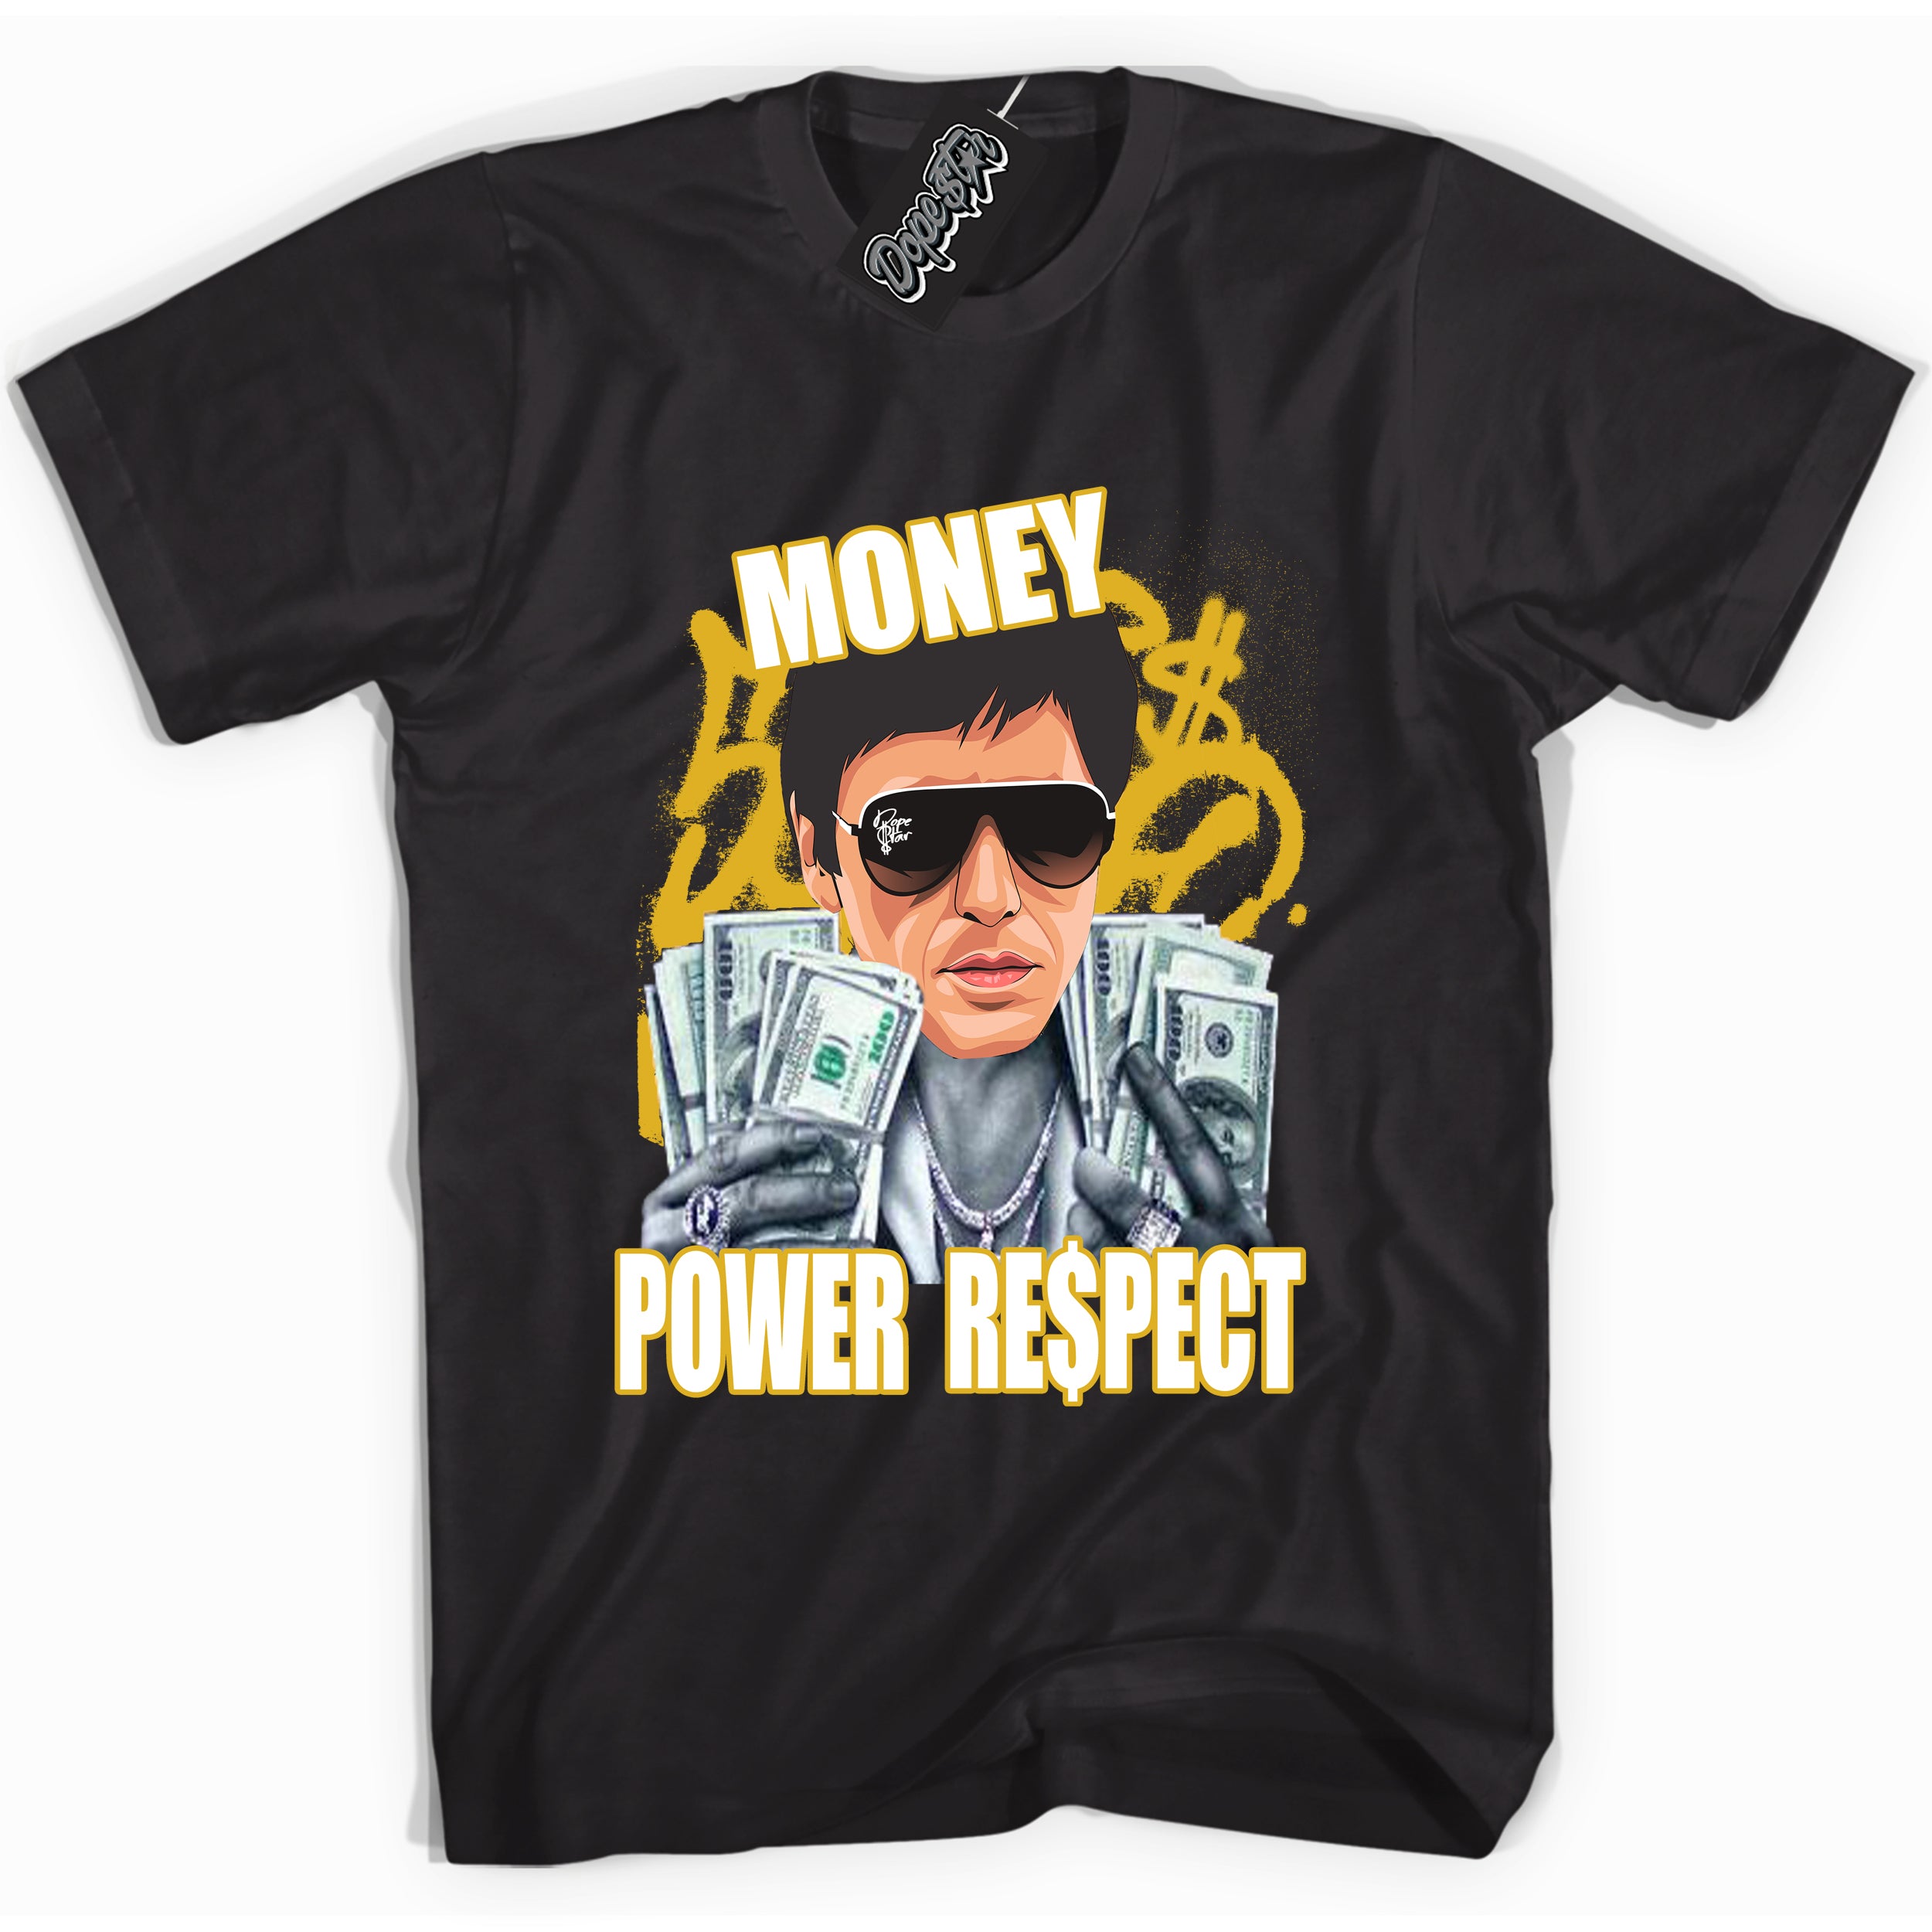 Cool Black Shirt with “ Tony Montana ” design that perfectly matches Yellow Ochre 6s Sneakers.